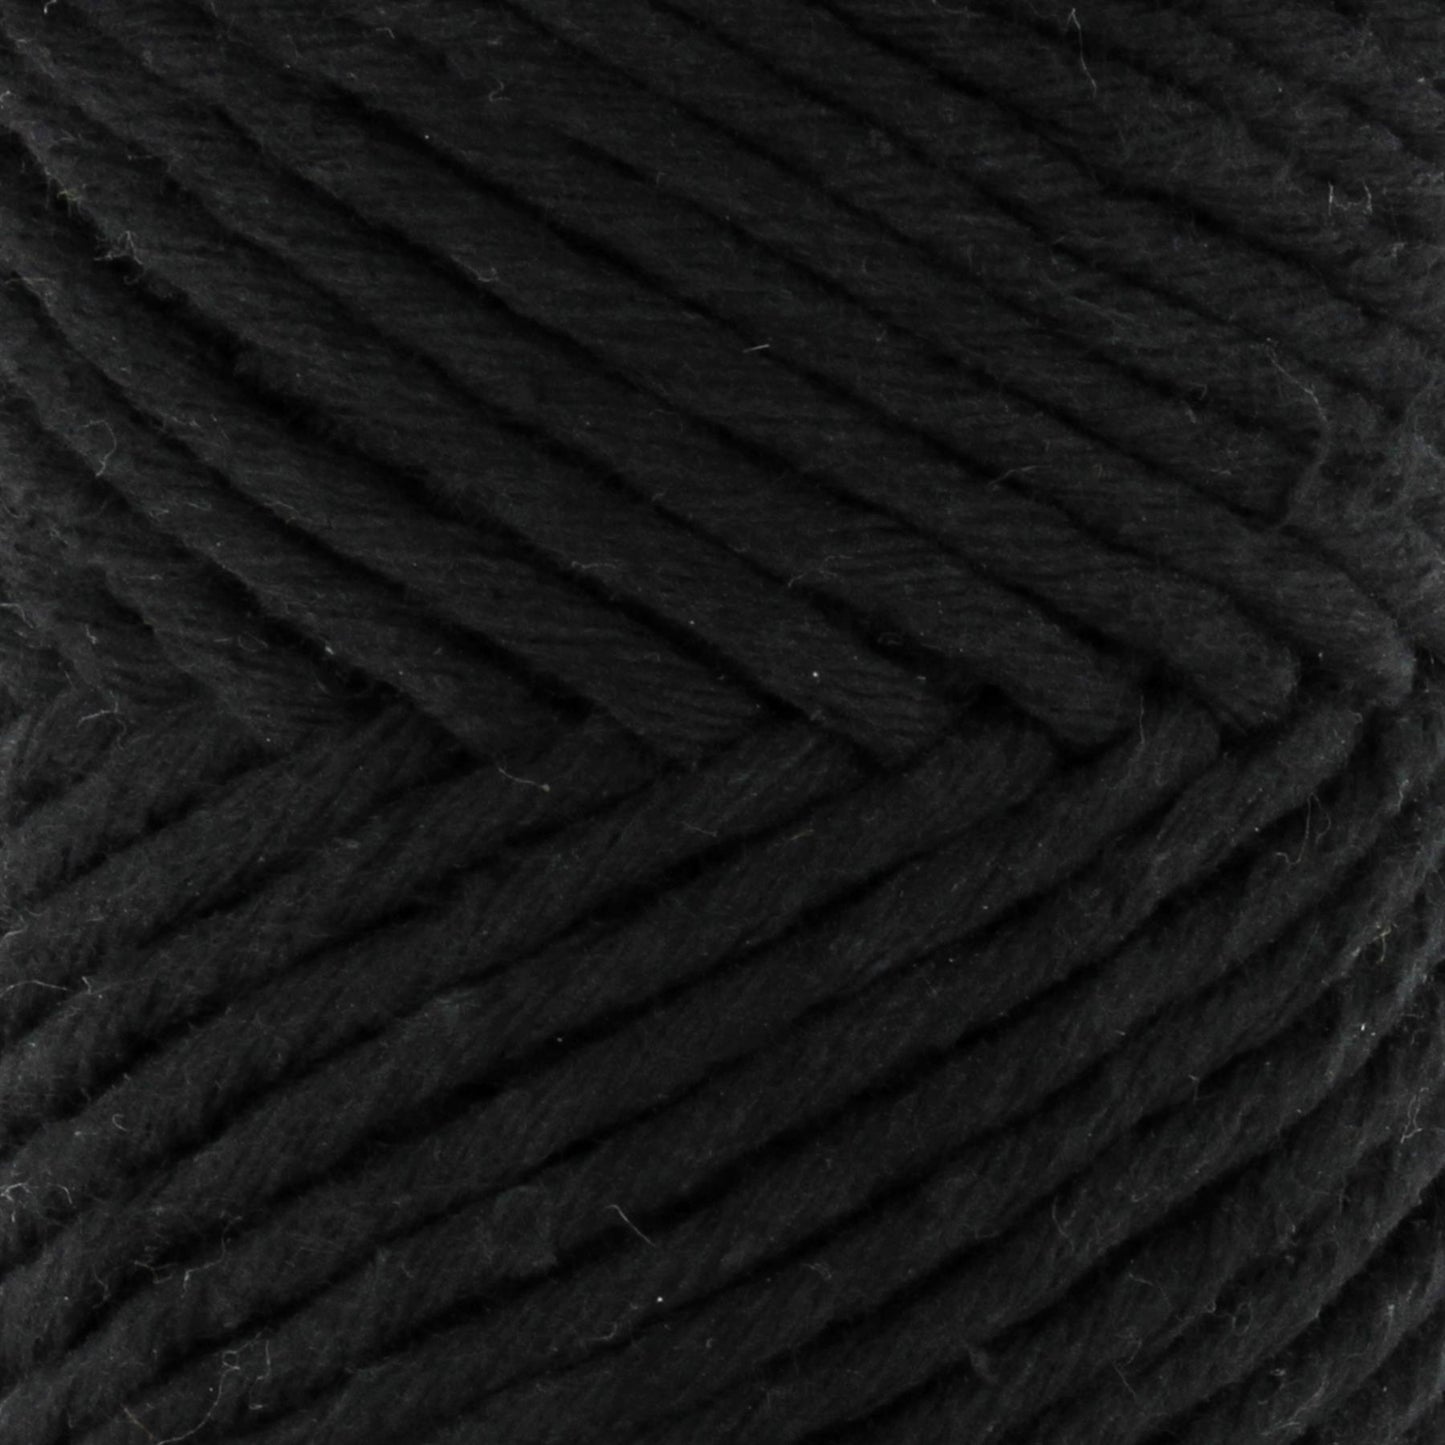 [Hoooked] S250200 Spesso Chunky Noir Cotton Yarn - 50M, 200g